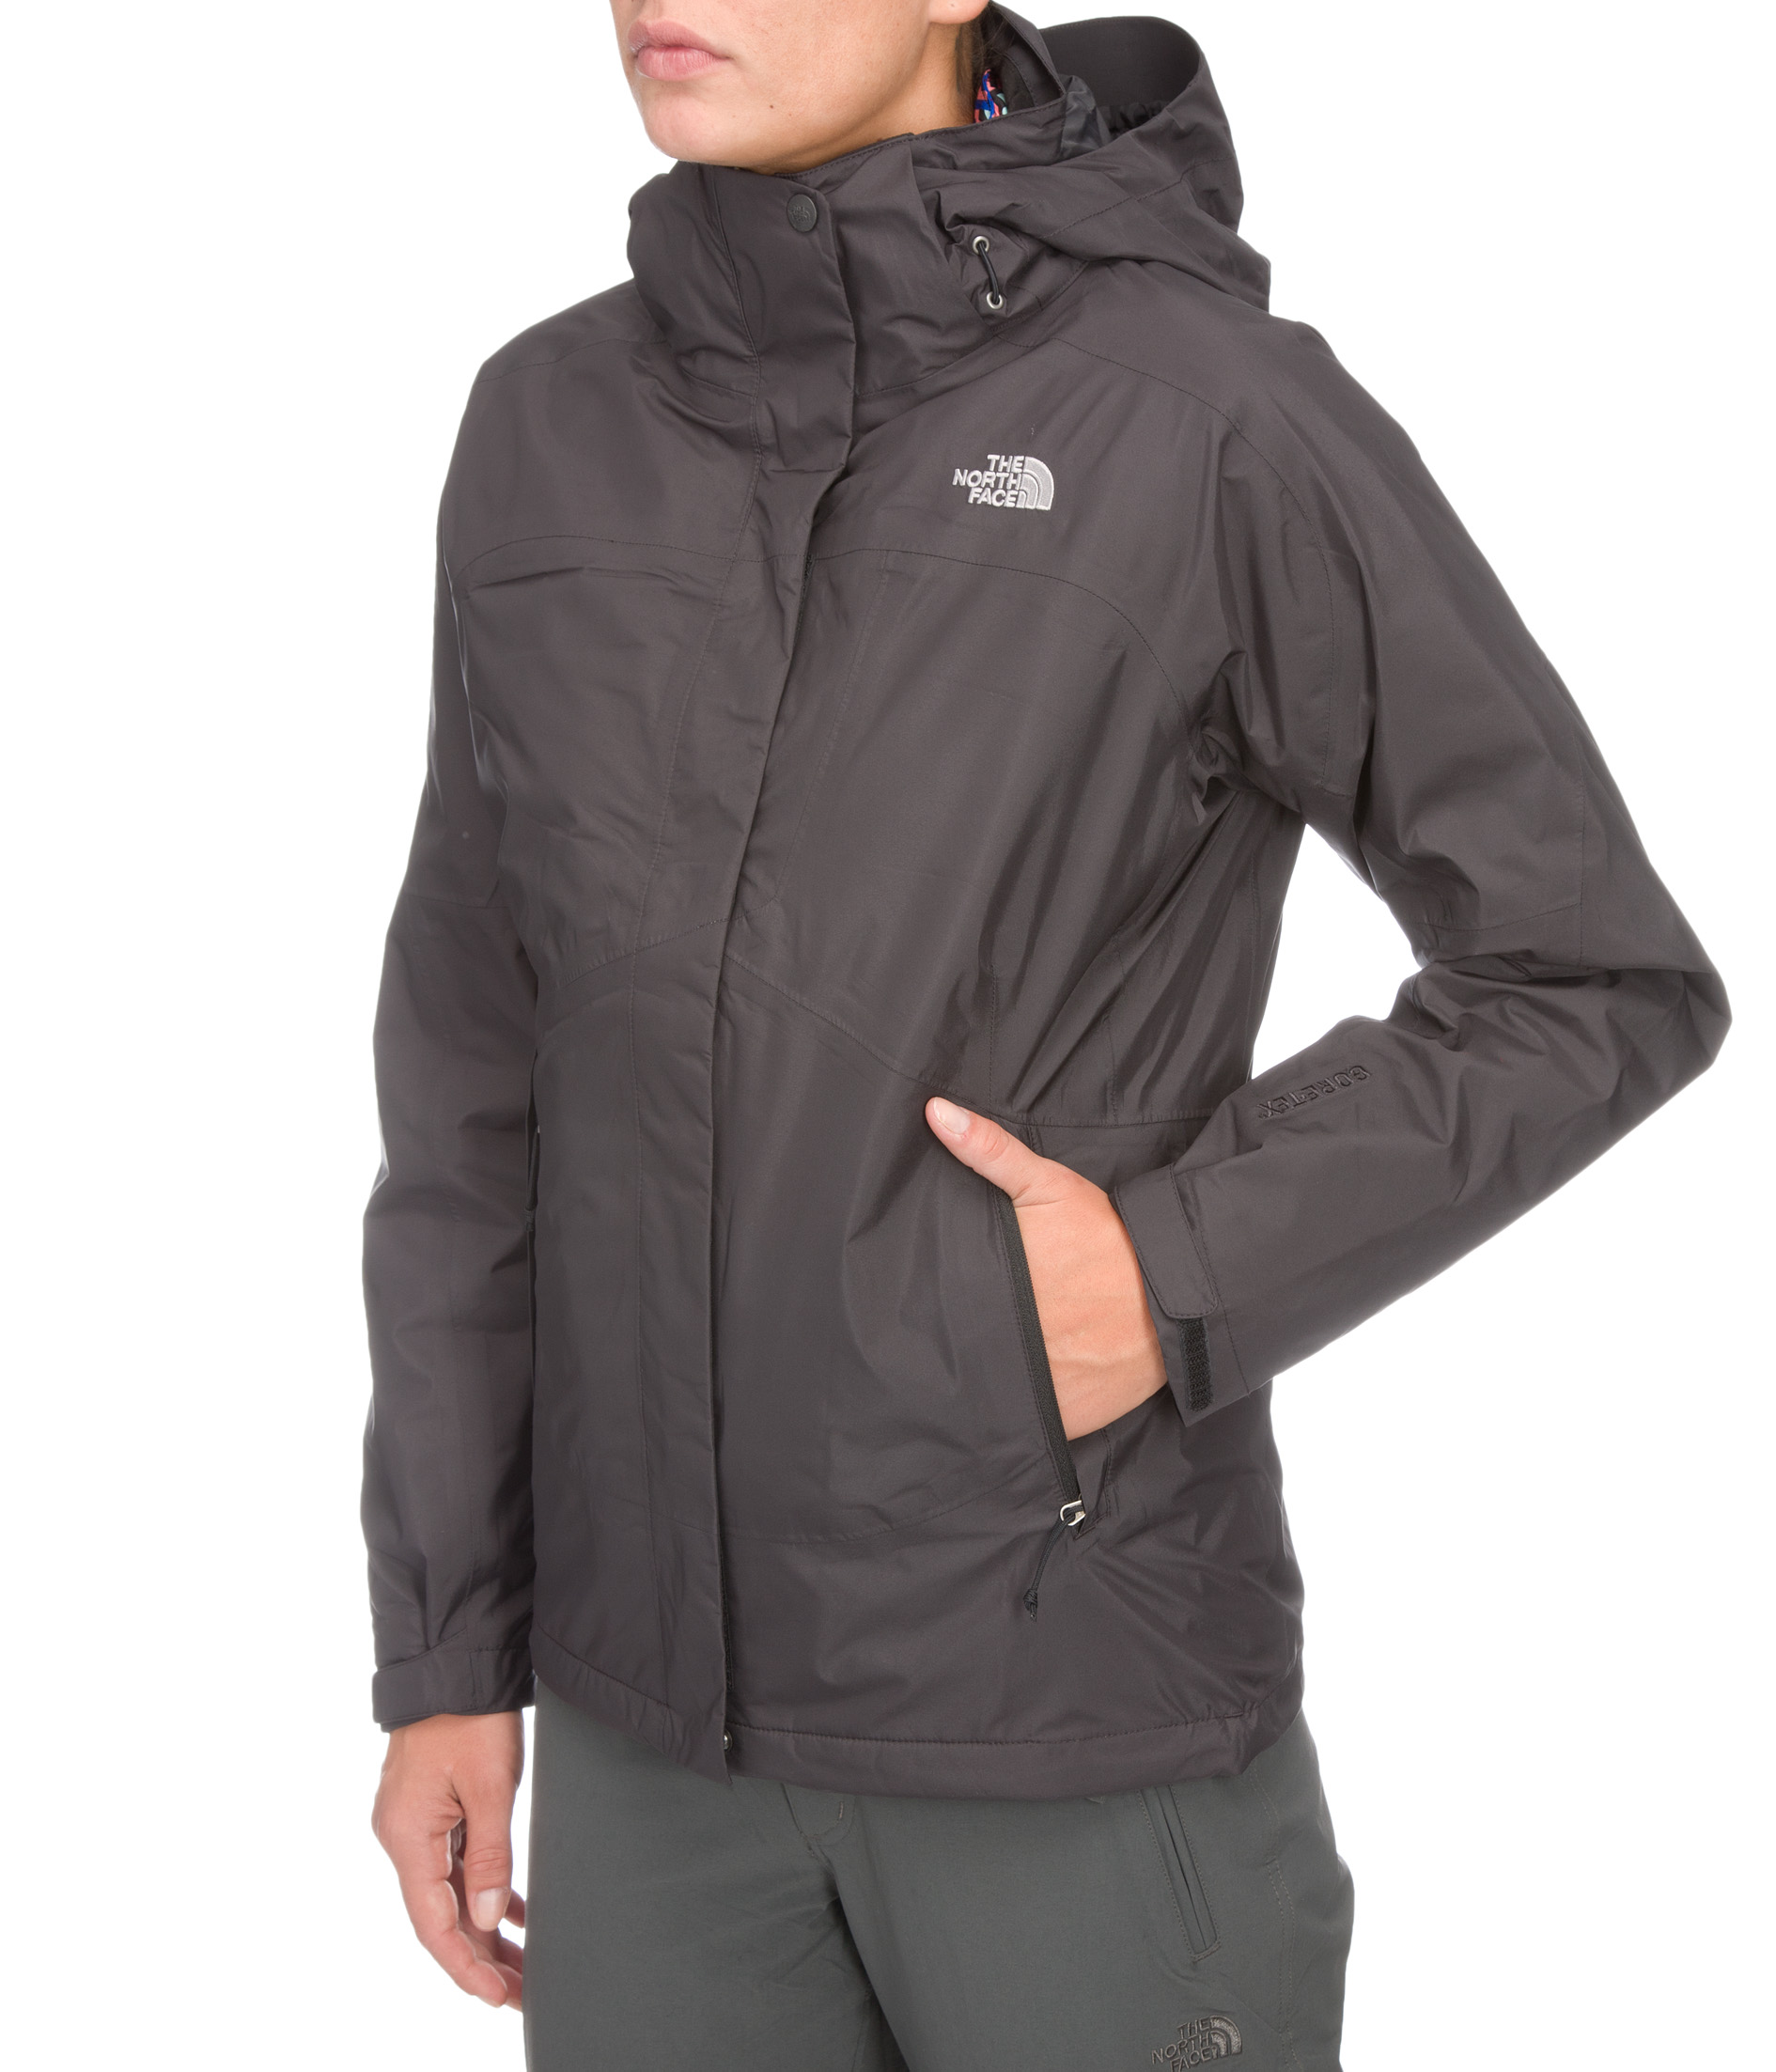 Foto The North Face Women's Mountain Light Triclimate™ Jacket foto 200293